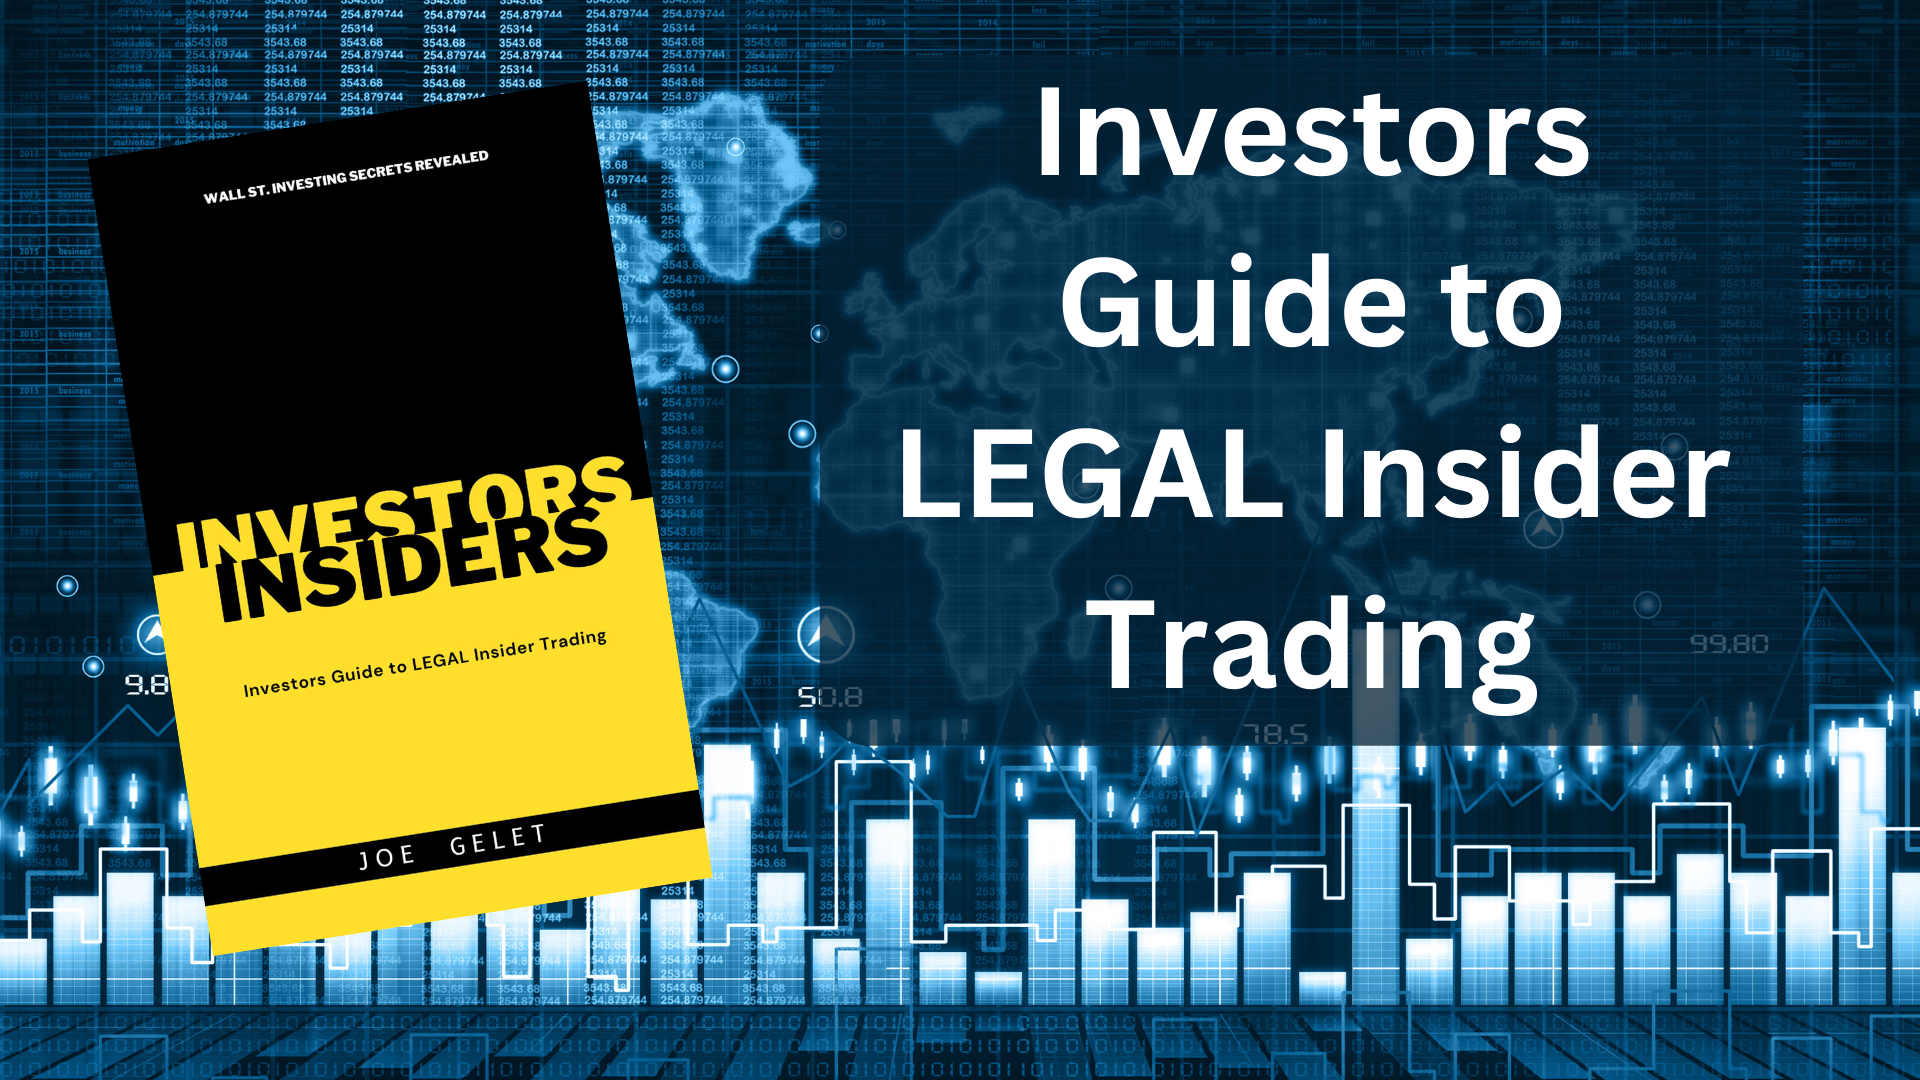 Book: Investors Guide to LEGAL Insider Trading